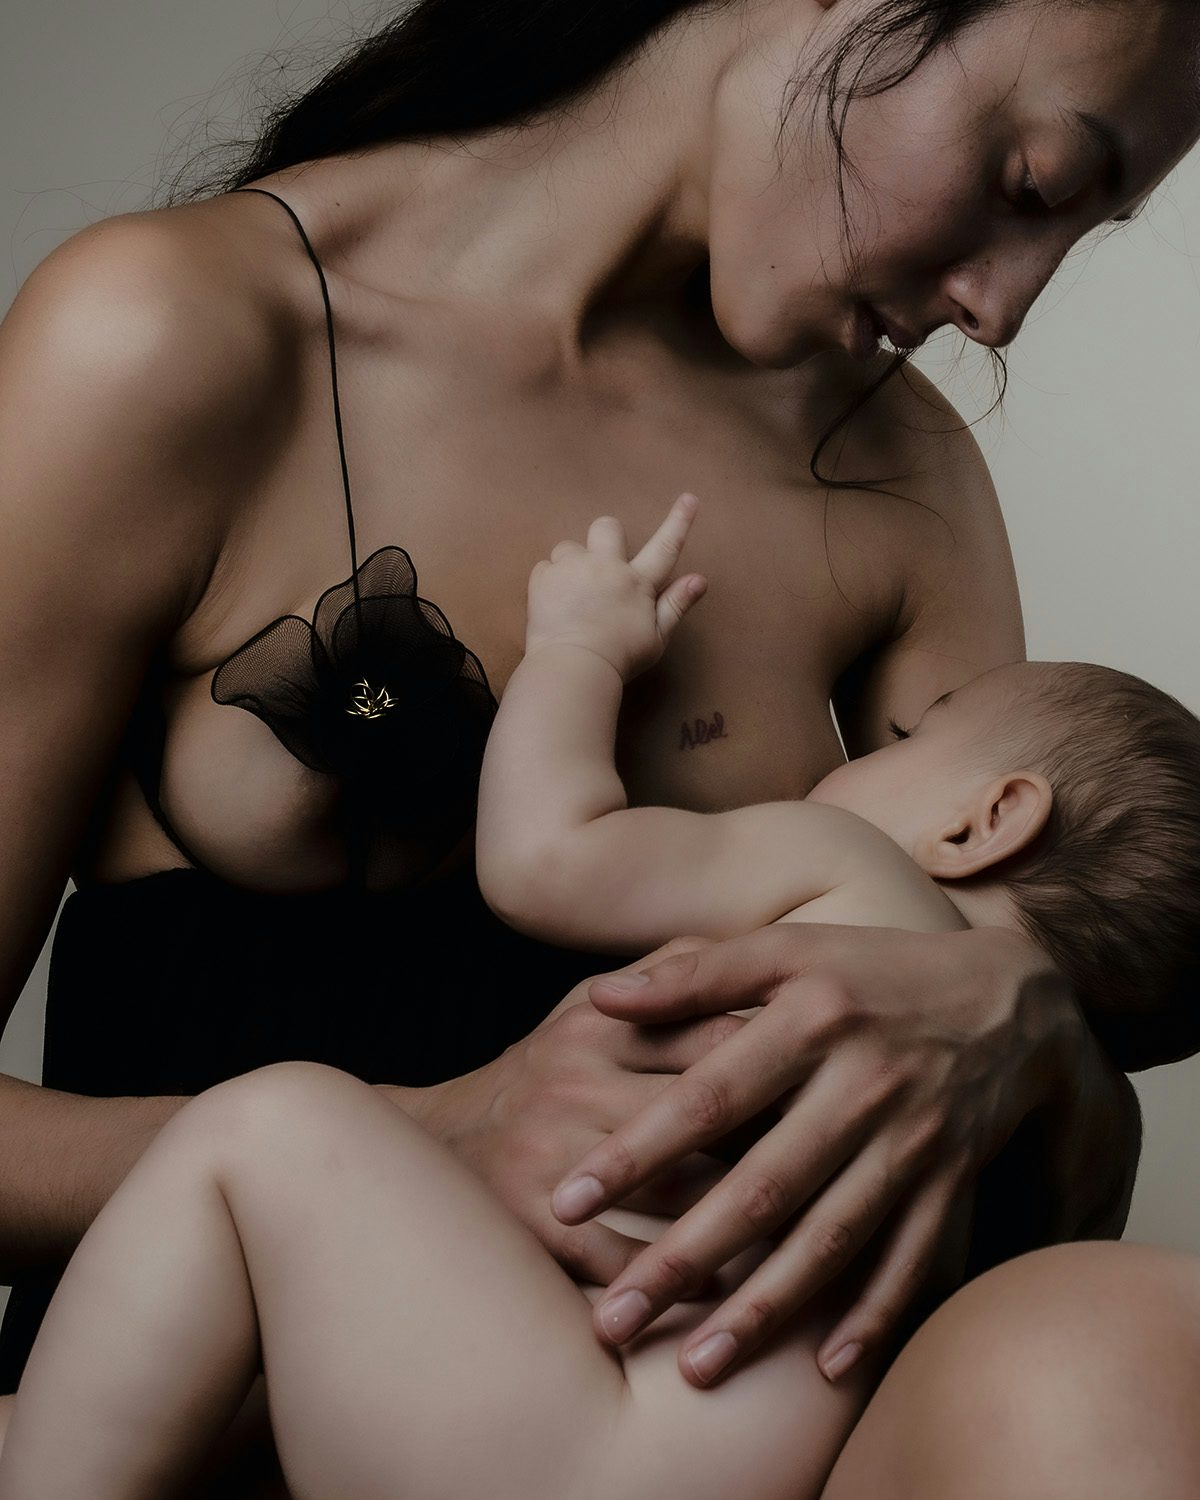 Image by Jet Swan shows a mother wearing a strappy dress as she breastfeeds her child